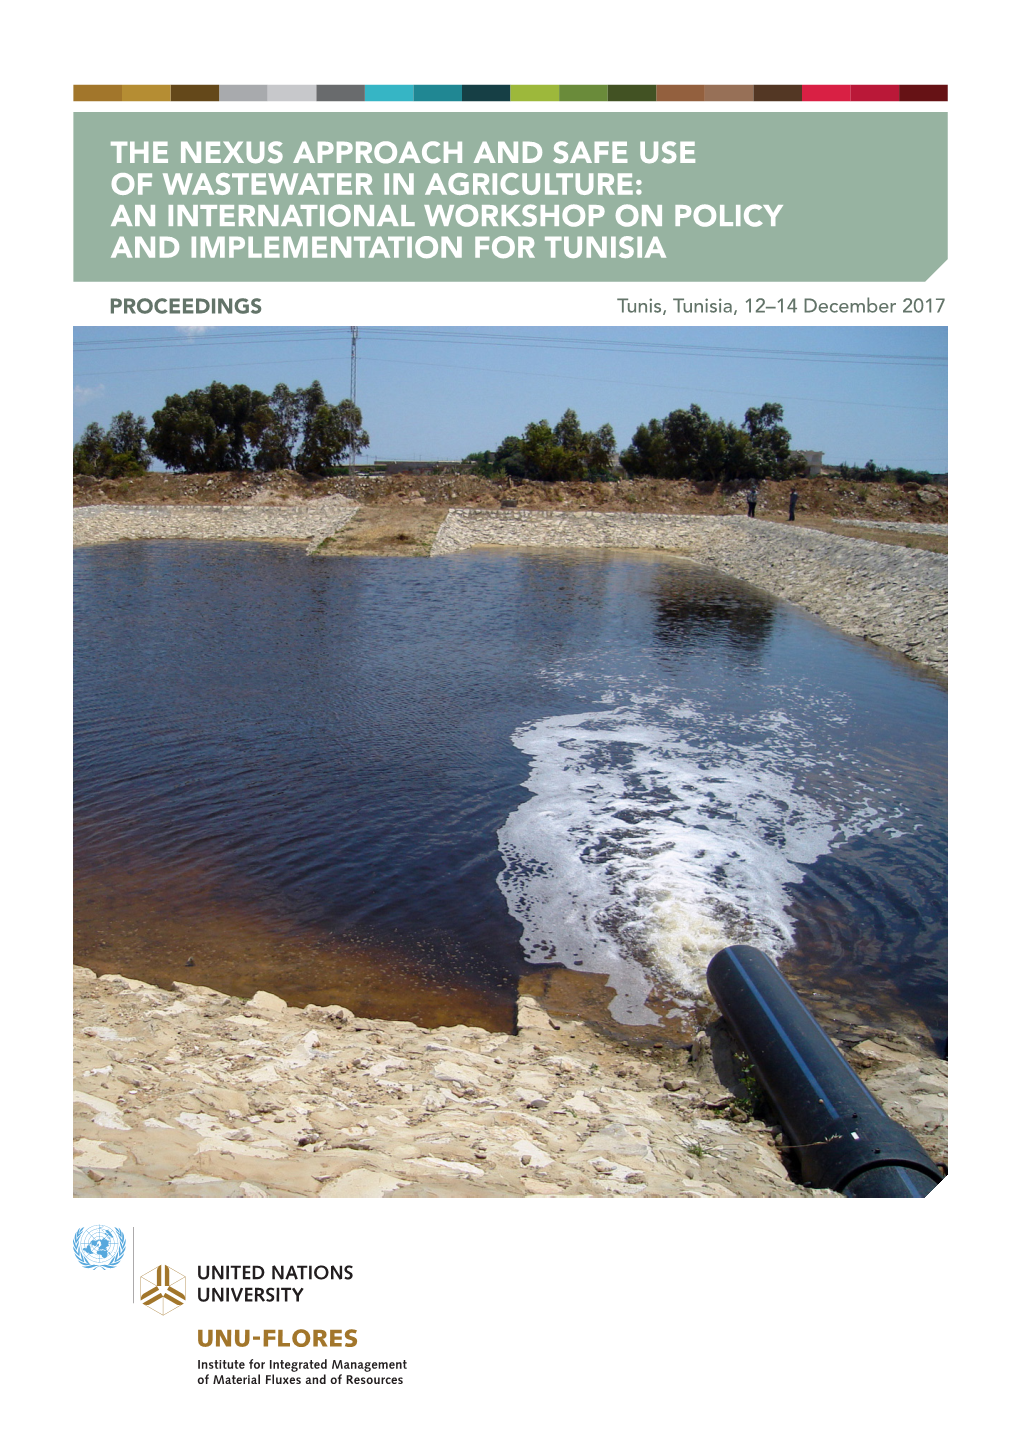 The Nexus Approach and Safe Use of Wastewater in Agriculture: an International Workshop on Policy and Implementation for Tunisia